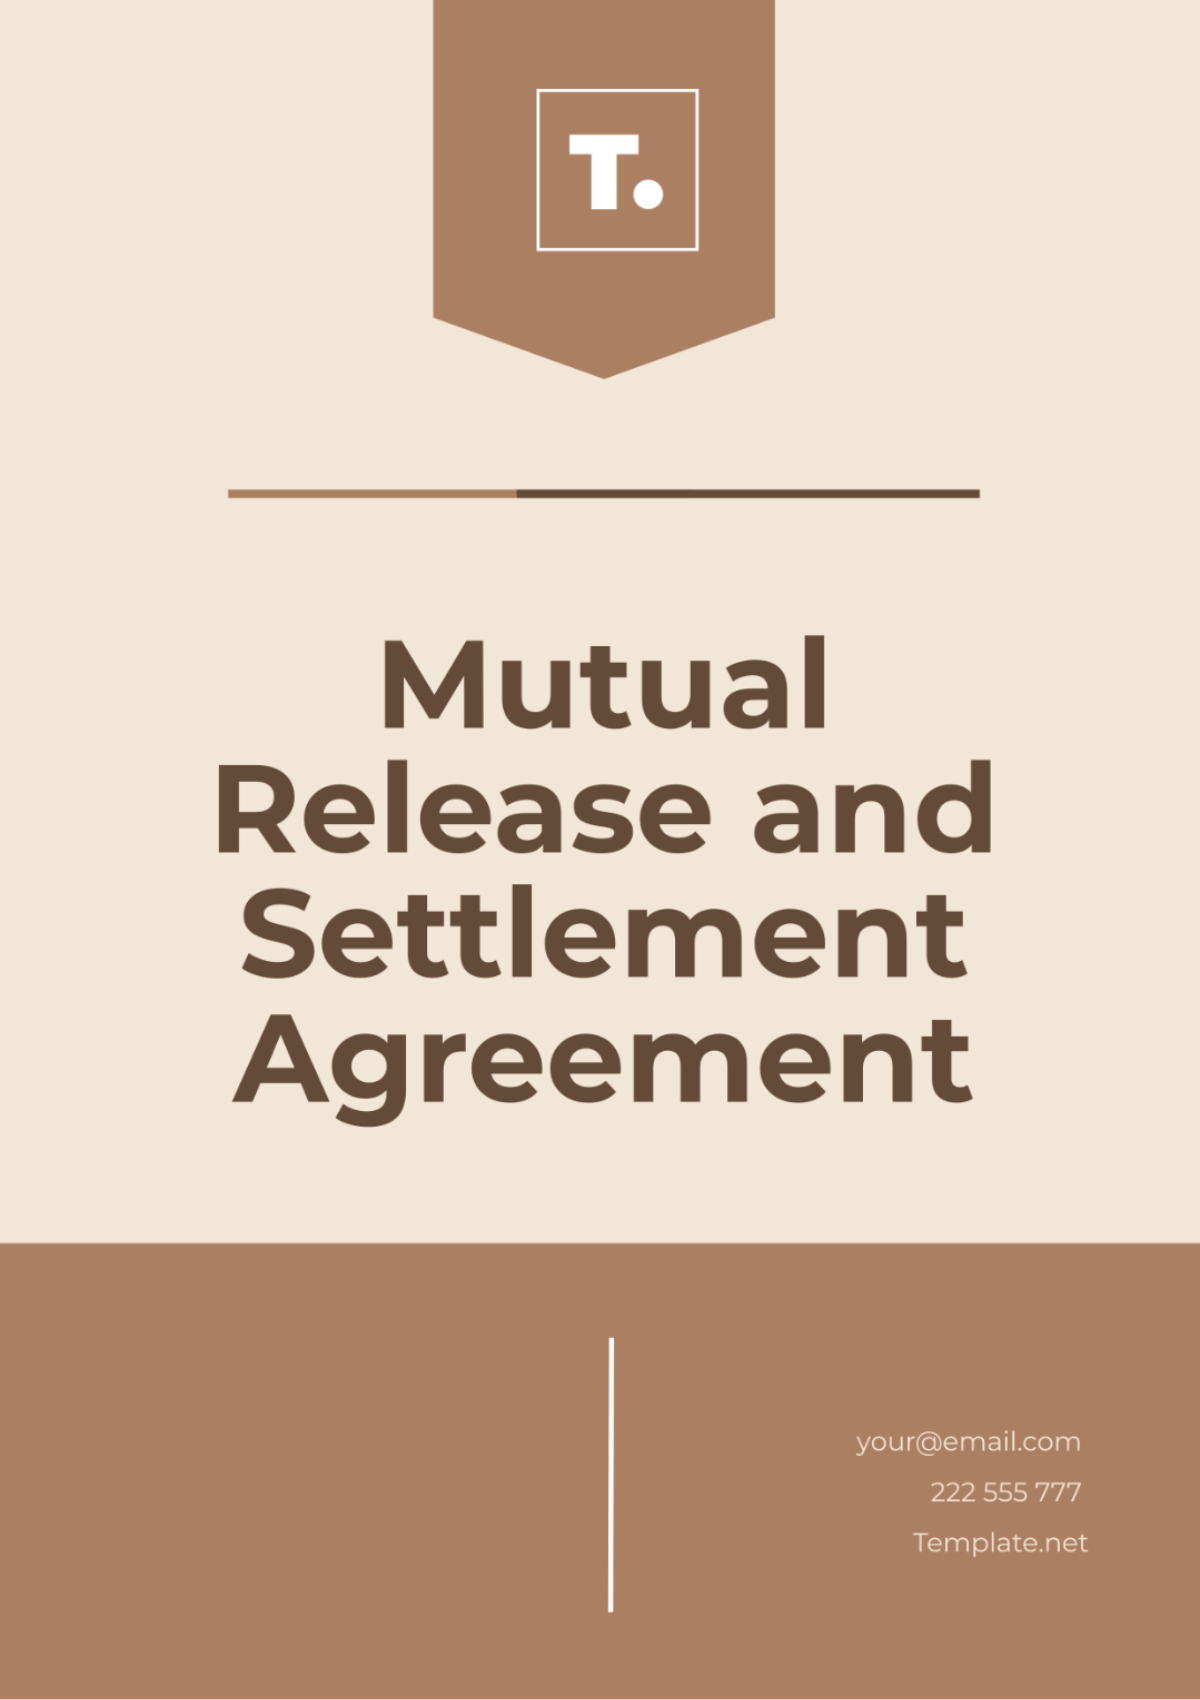 Free Mutual Release and Settlement Agreement Template